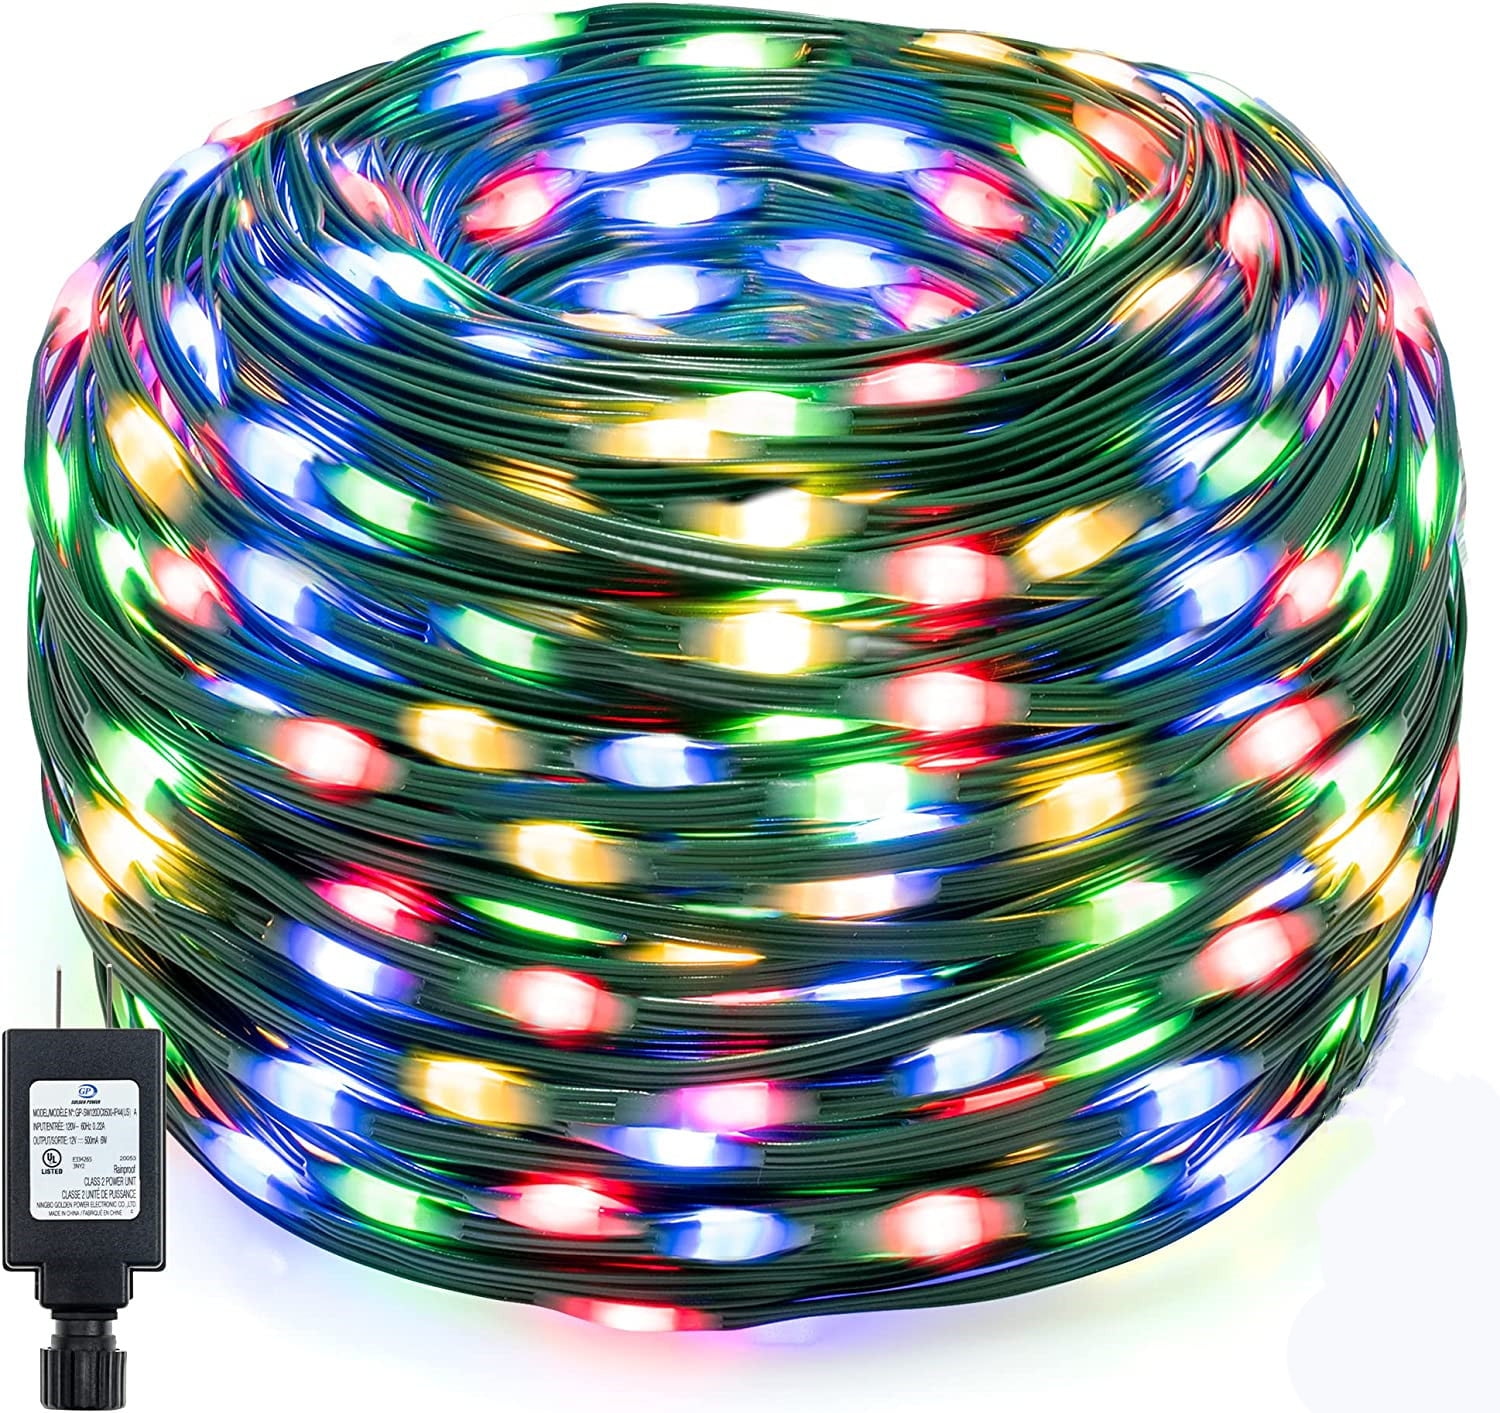  Yihaojia Christmas Deals,Christmas Lights Warehouse Deals,  Under 5 Dollars, Under 10 Dollars, for Men, for Women : Sports & Outdoors